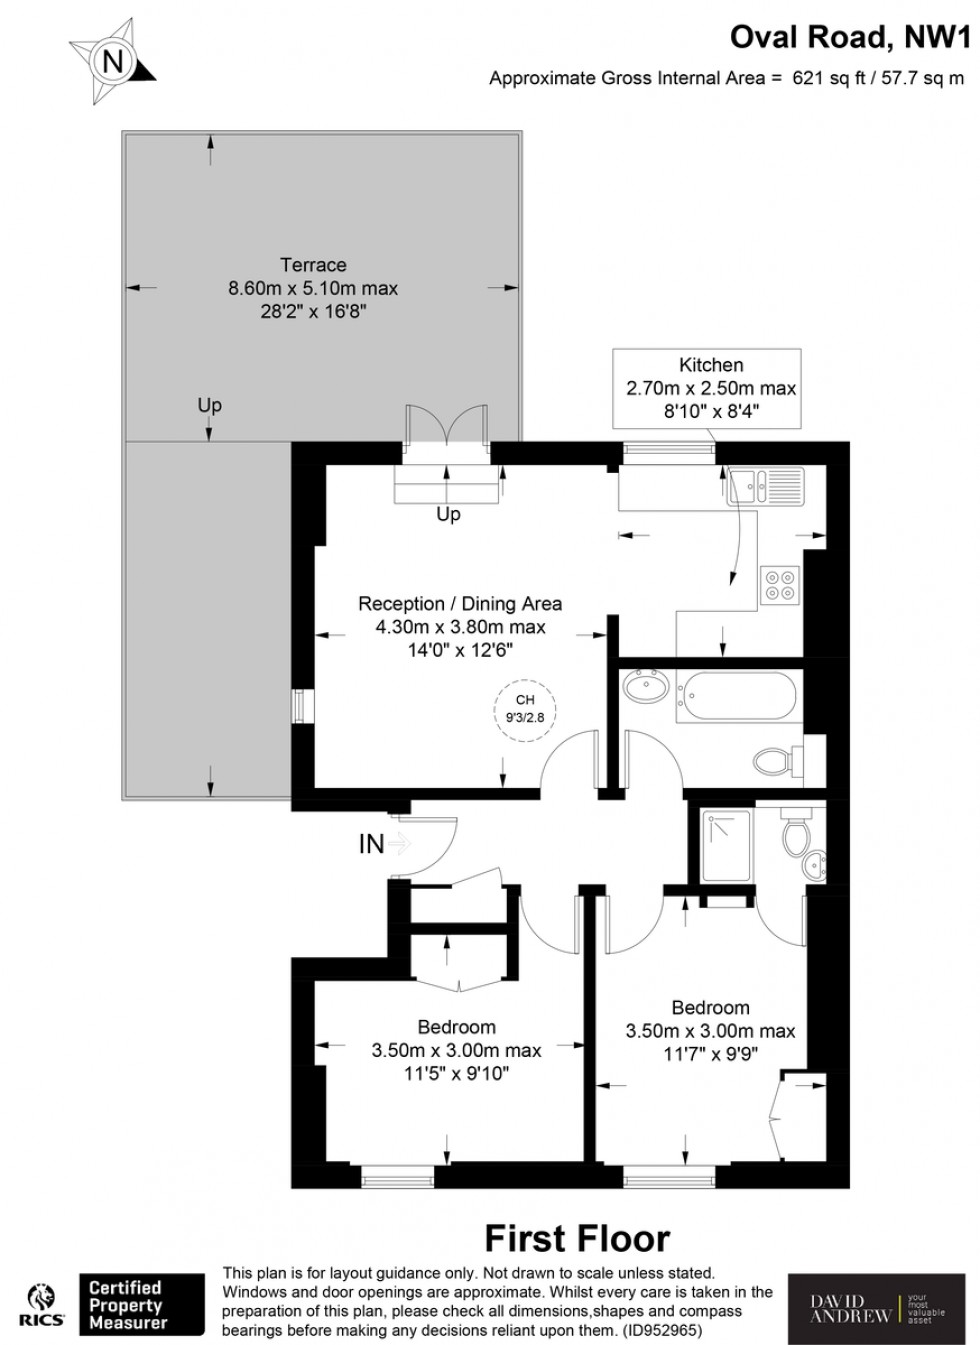 Floorplan for Oval Road, NW1 7EA